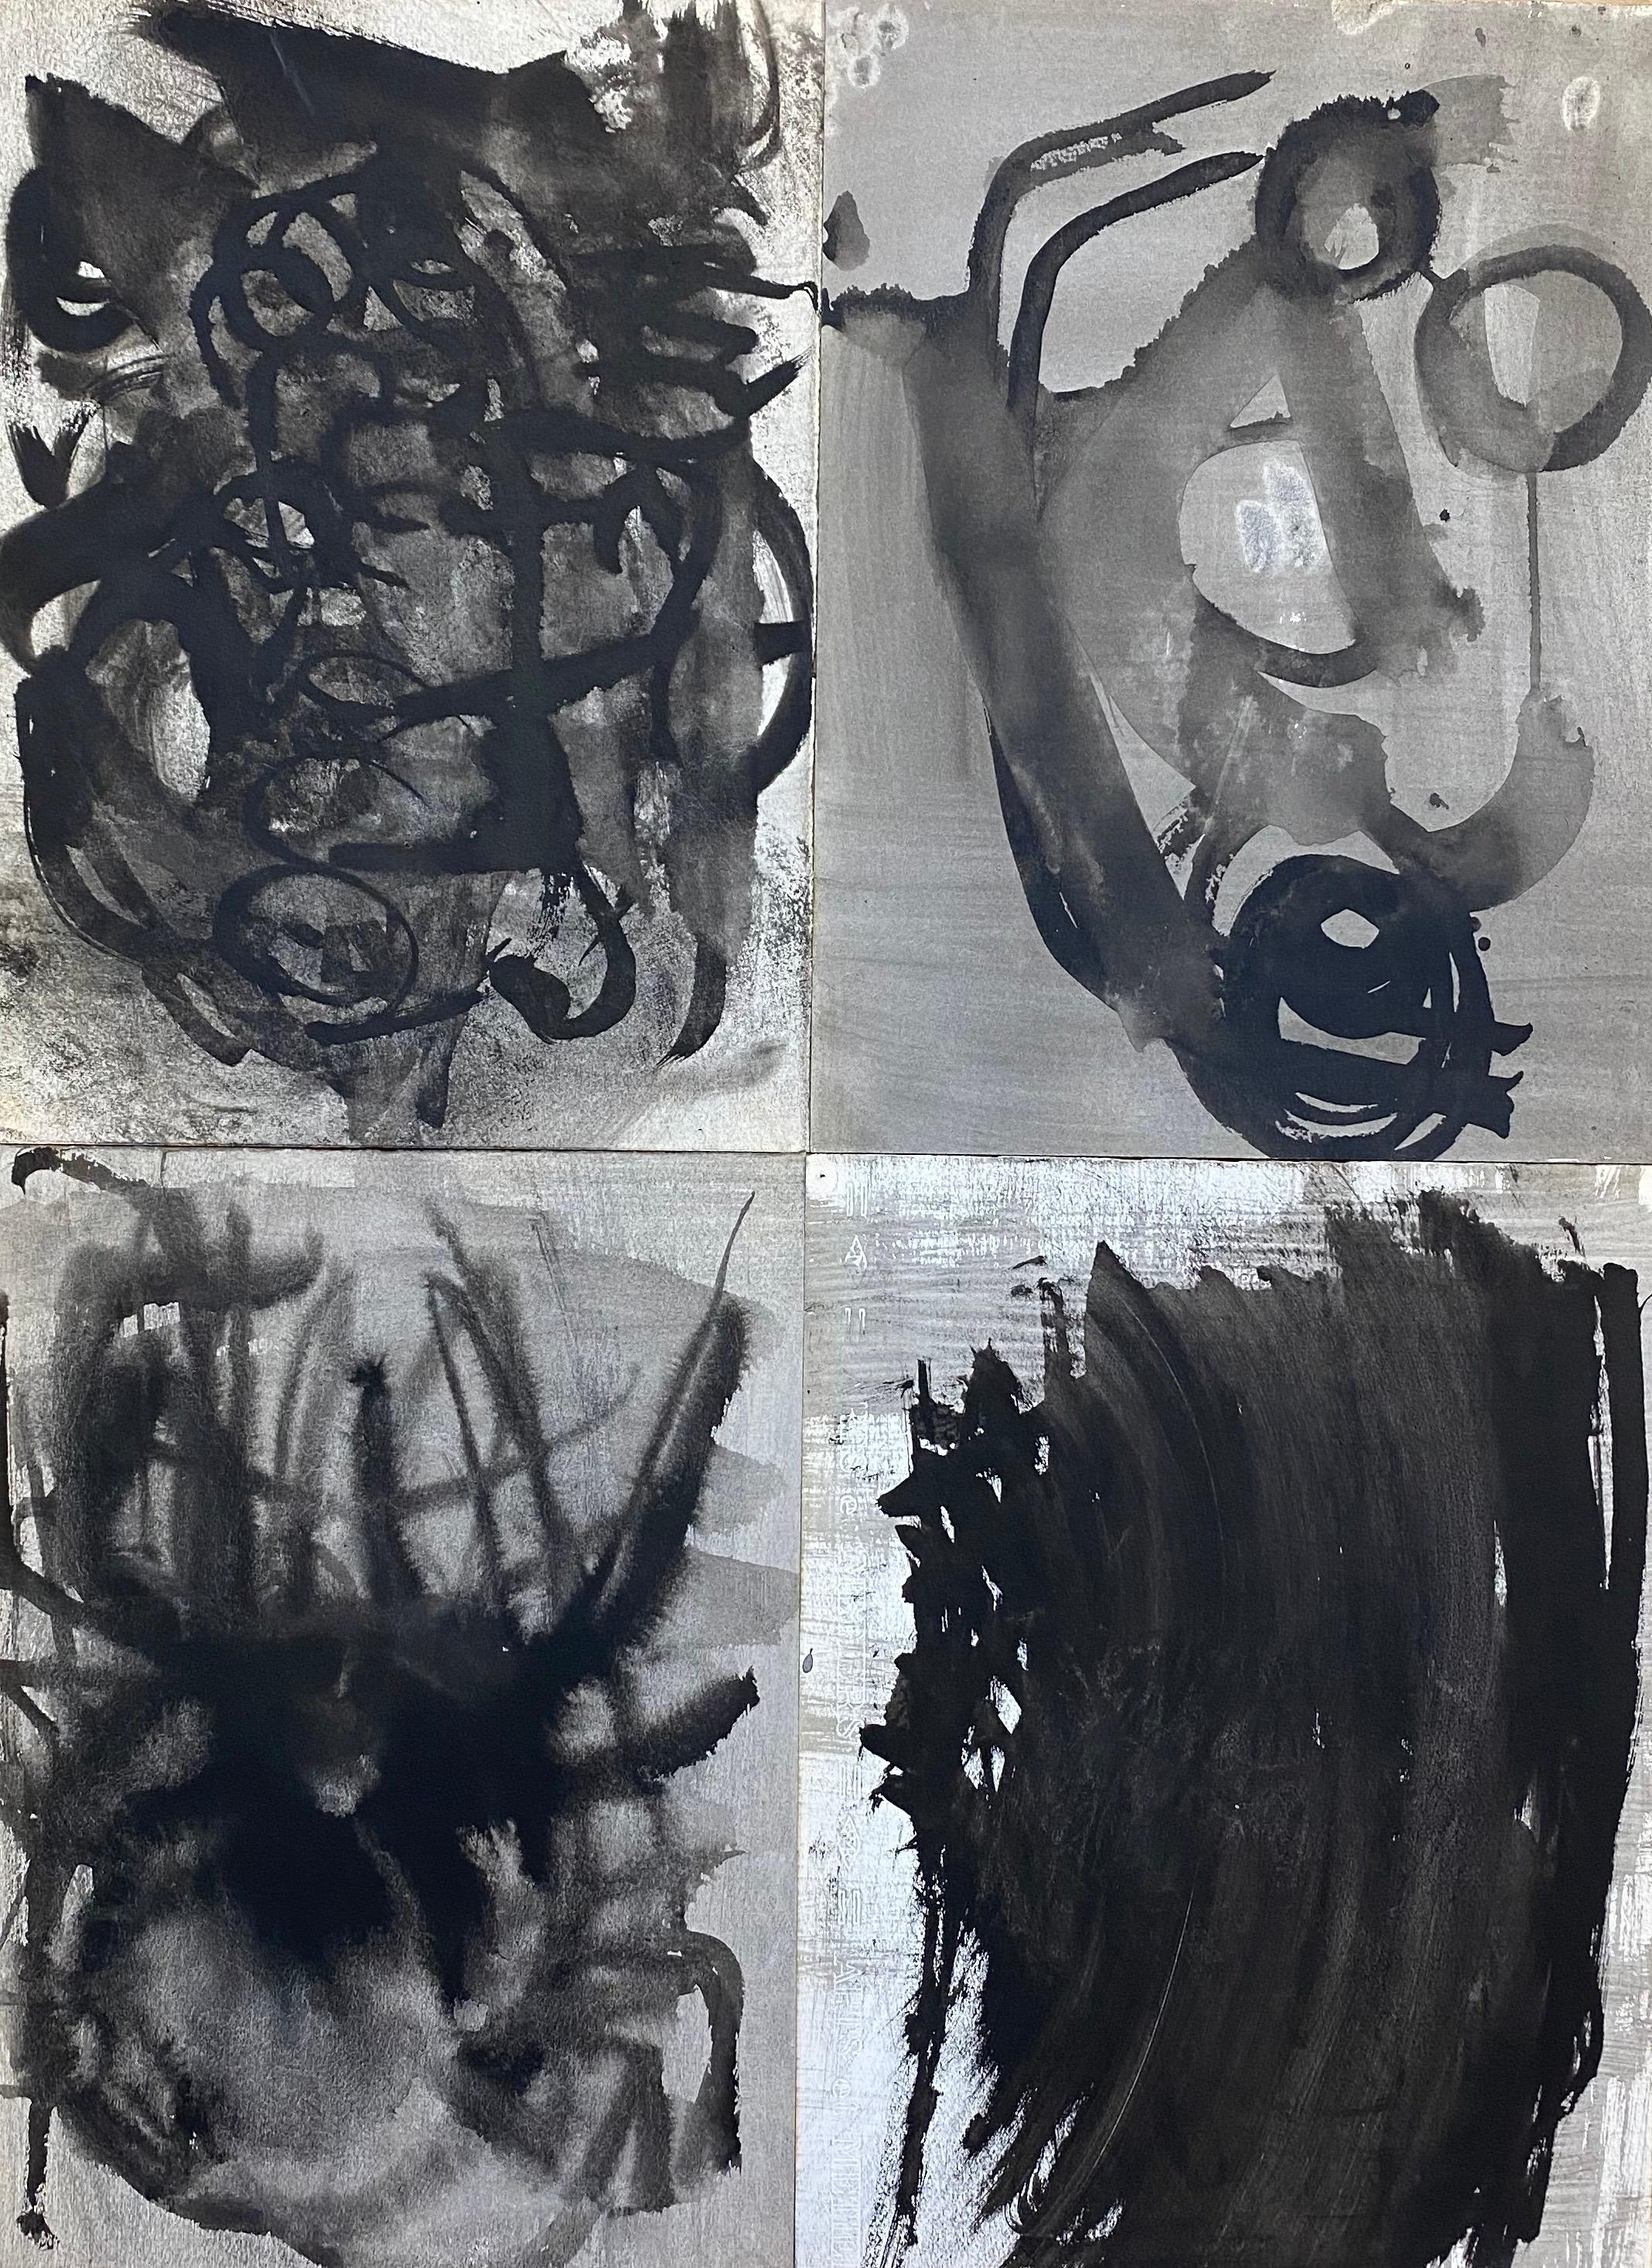 SET OF 4 - ORIGINAL 1970'S FRENCH ABSTRACT BLACK & WHITE PAINTINGS - Painting by Claude Lagouche